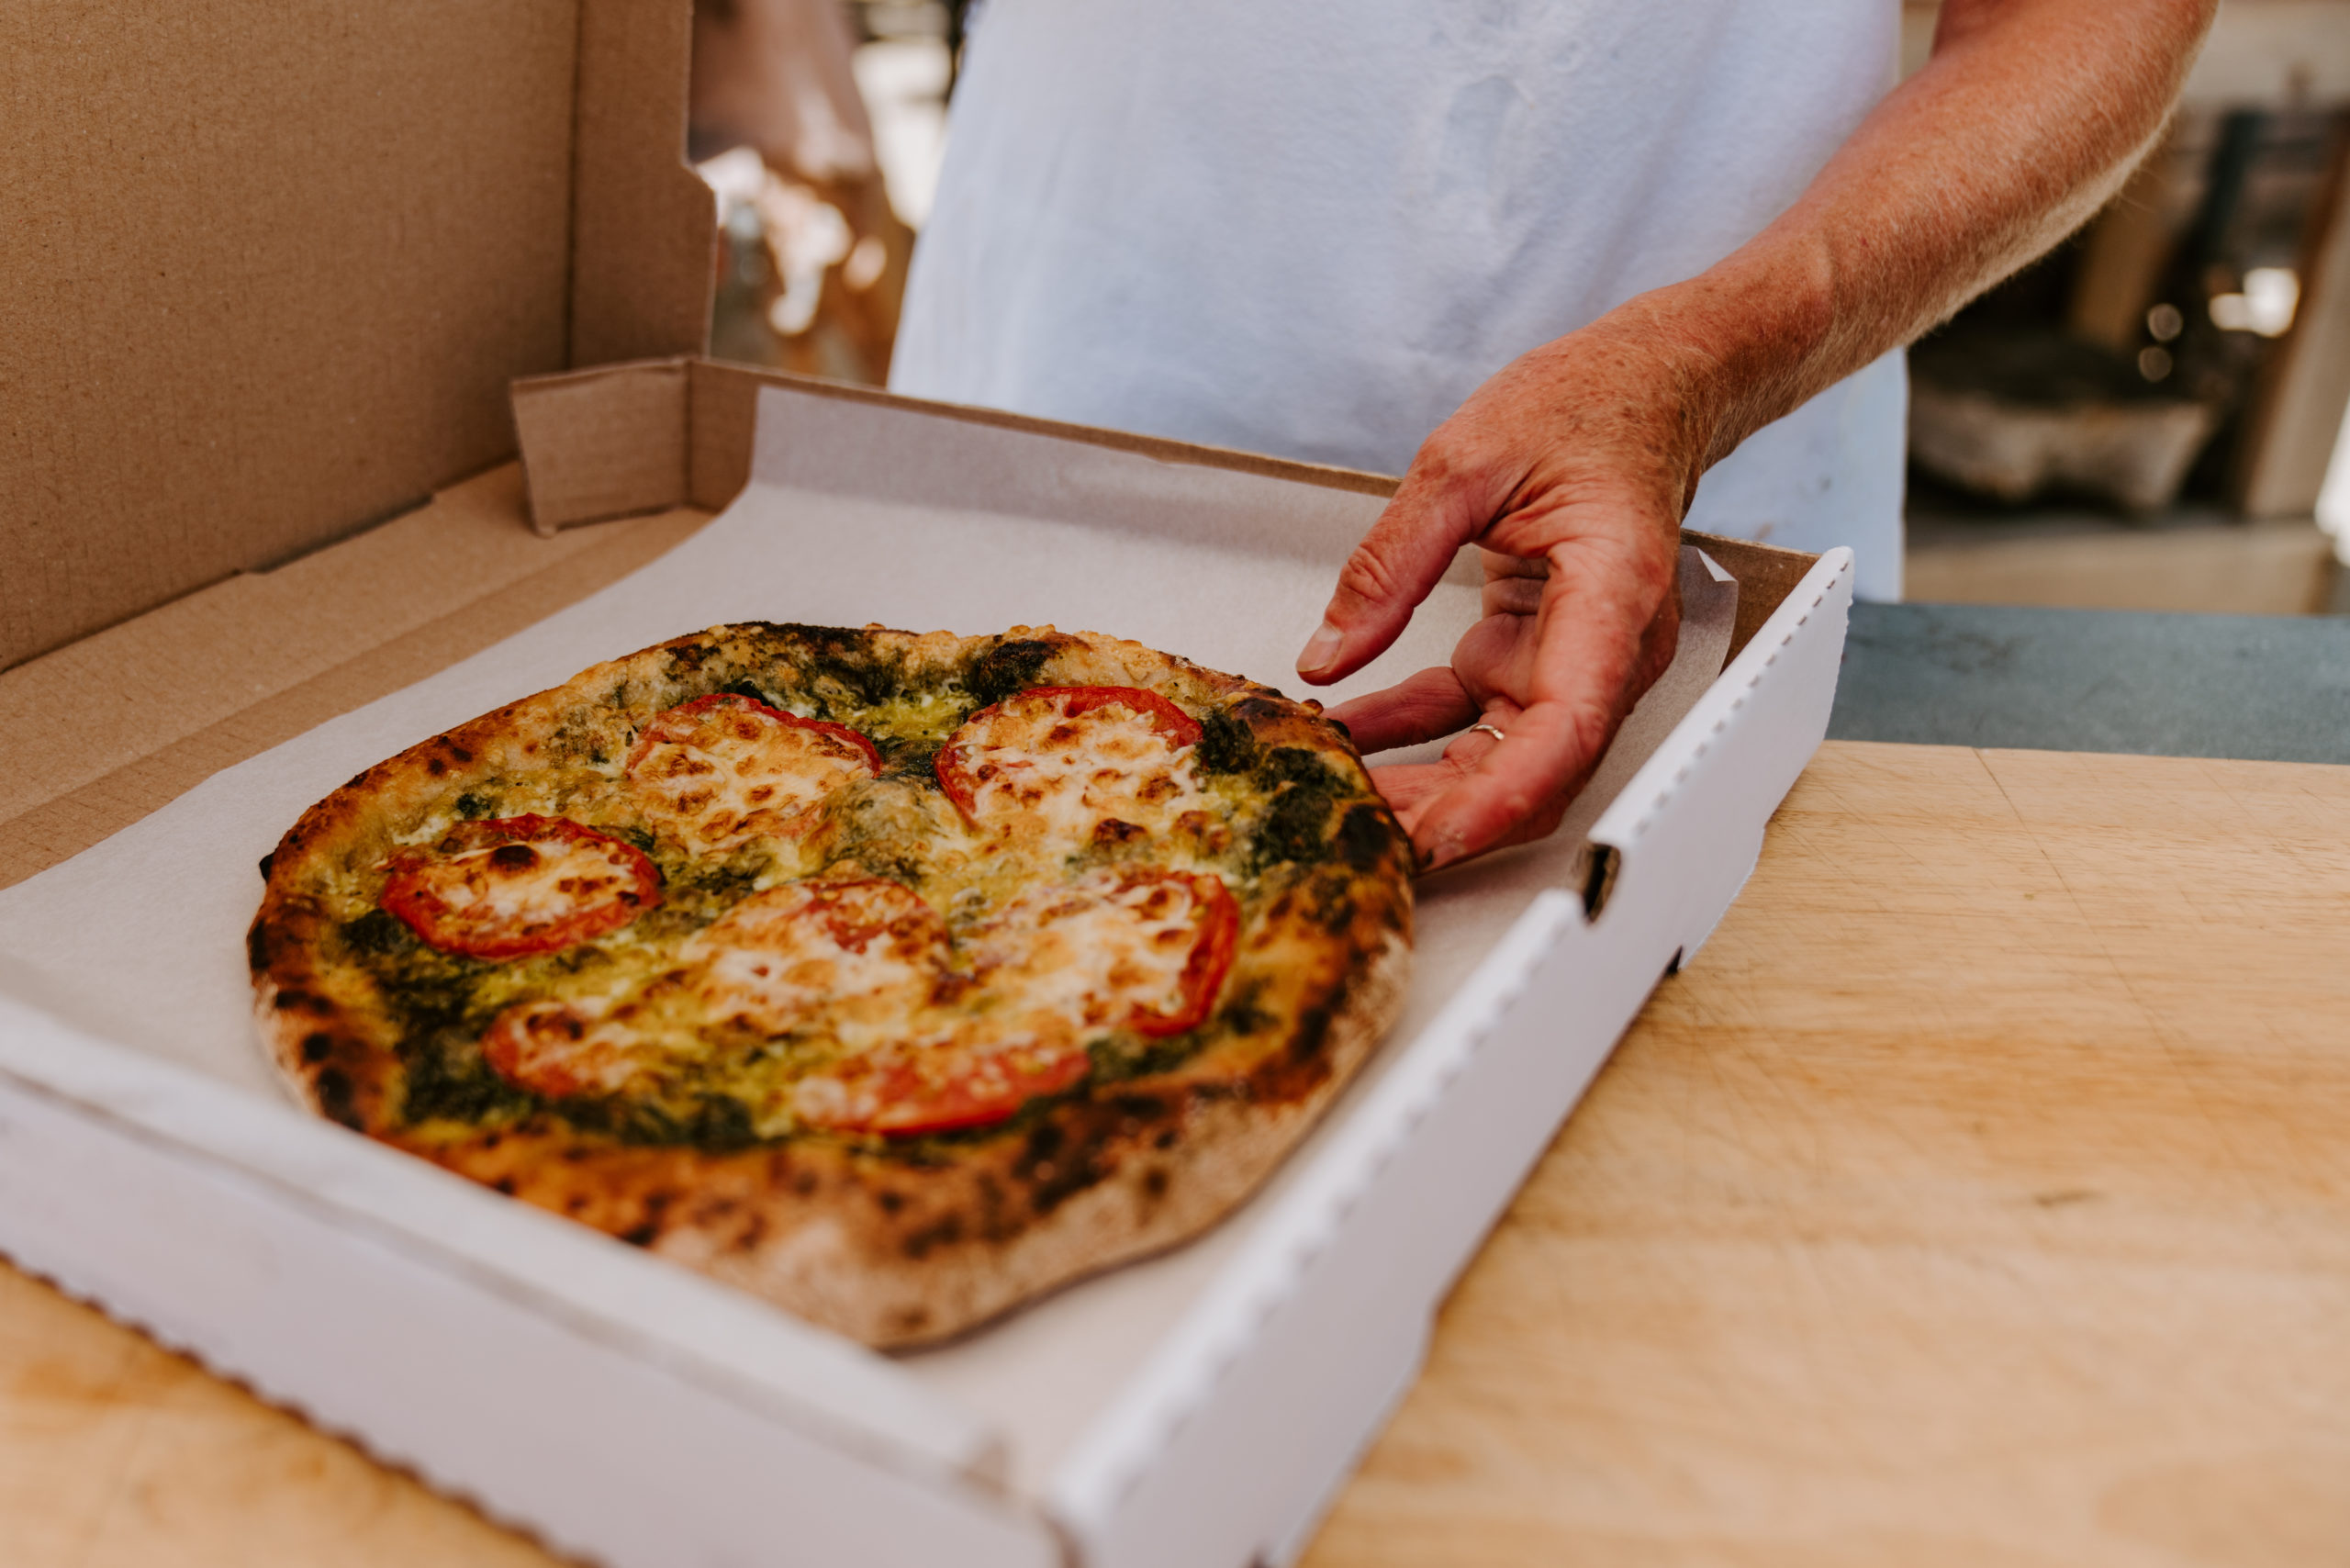 Pizza being placed in to-go box.